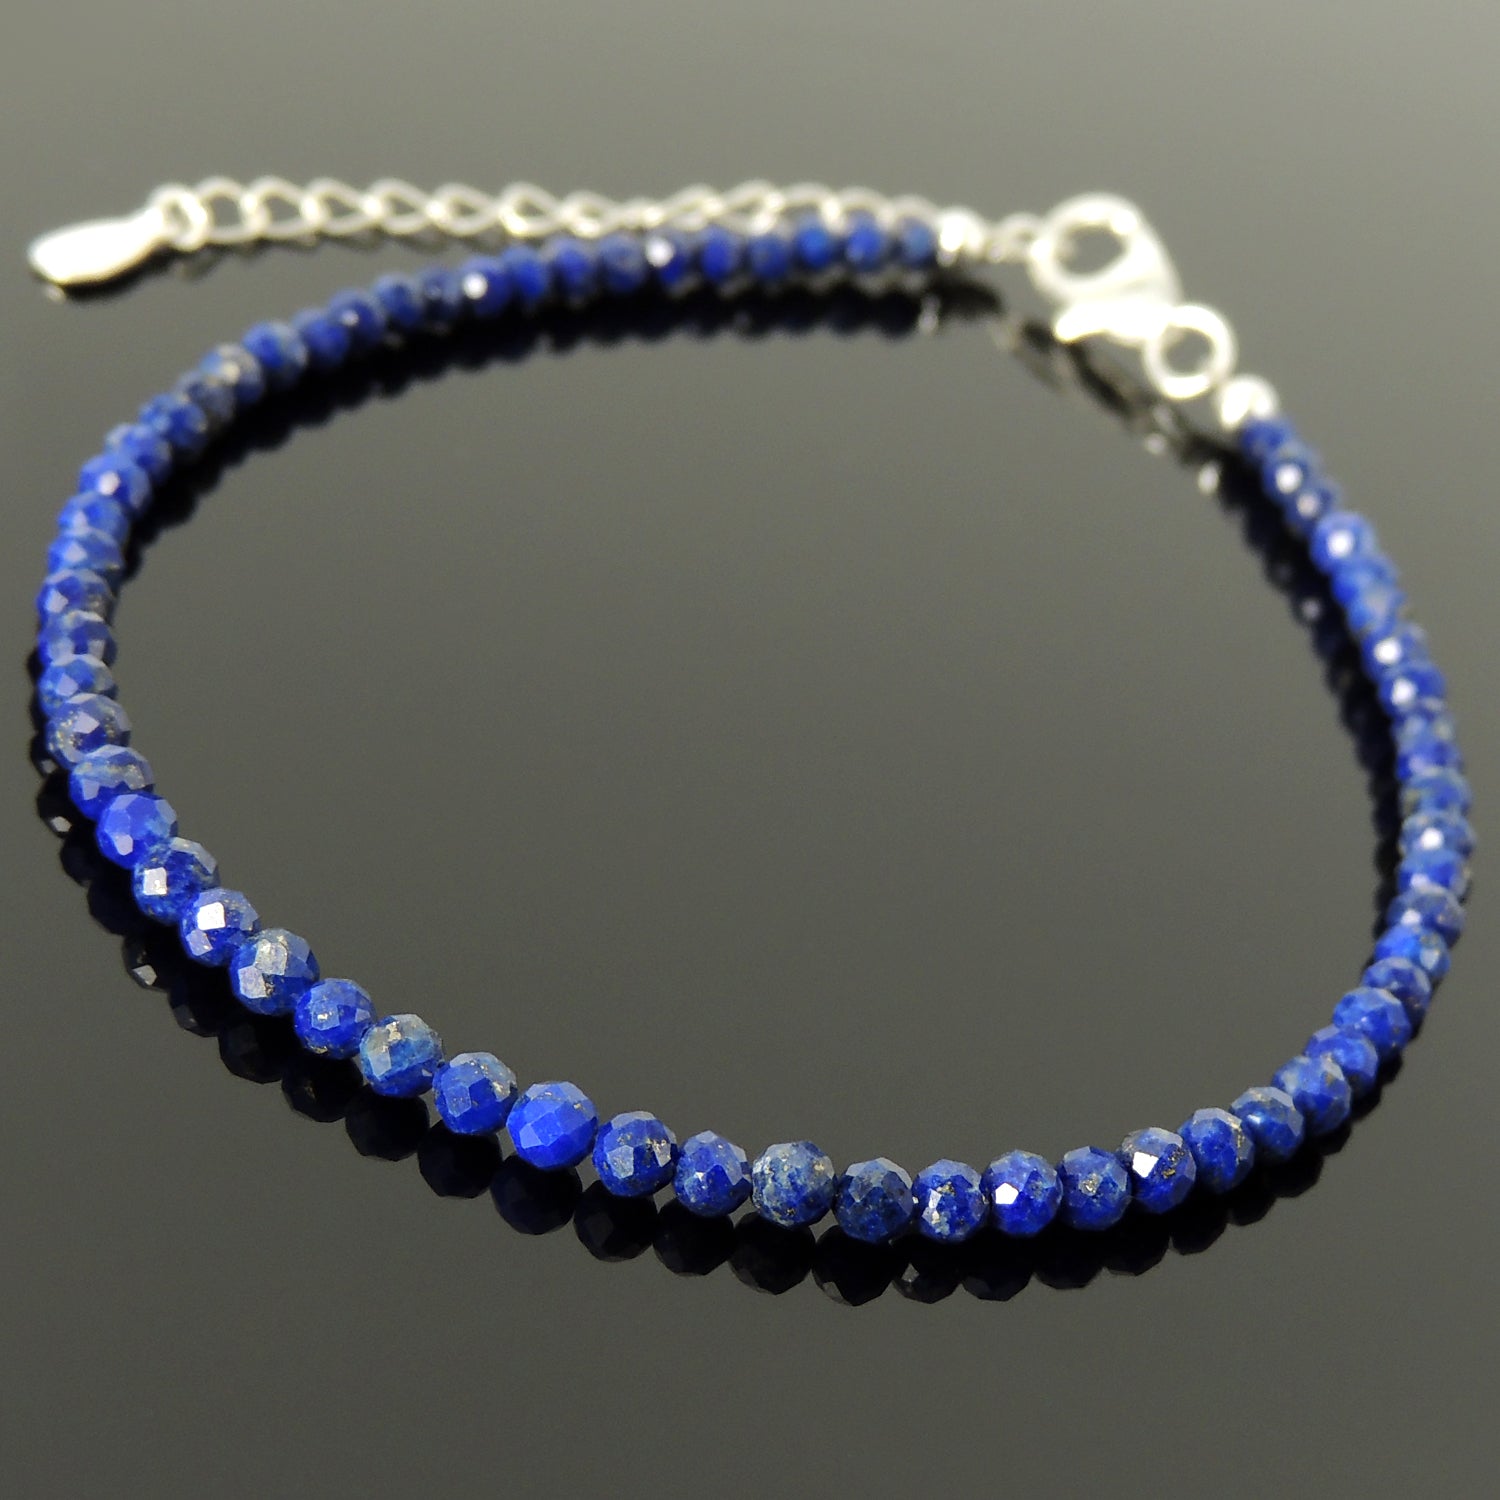 Natural Lapis Lazuli Faceted Crystal Anklet for Chakra Meditation, Healing, Awareness with 3mm Small Beads, Adjustable Sterling Silver Chain Link, Clasp, .925 Purity, Non-plated AN034